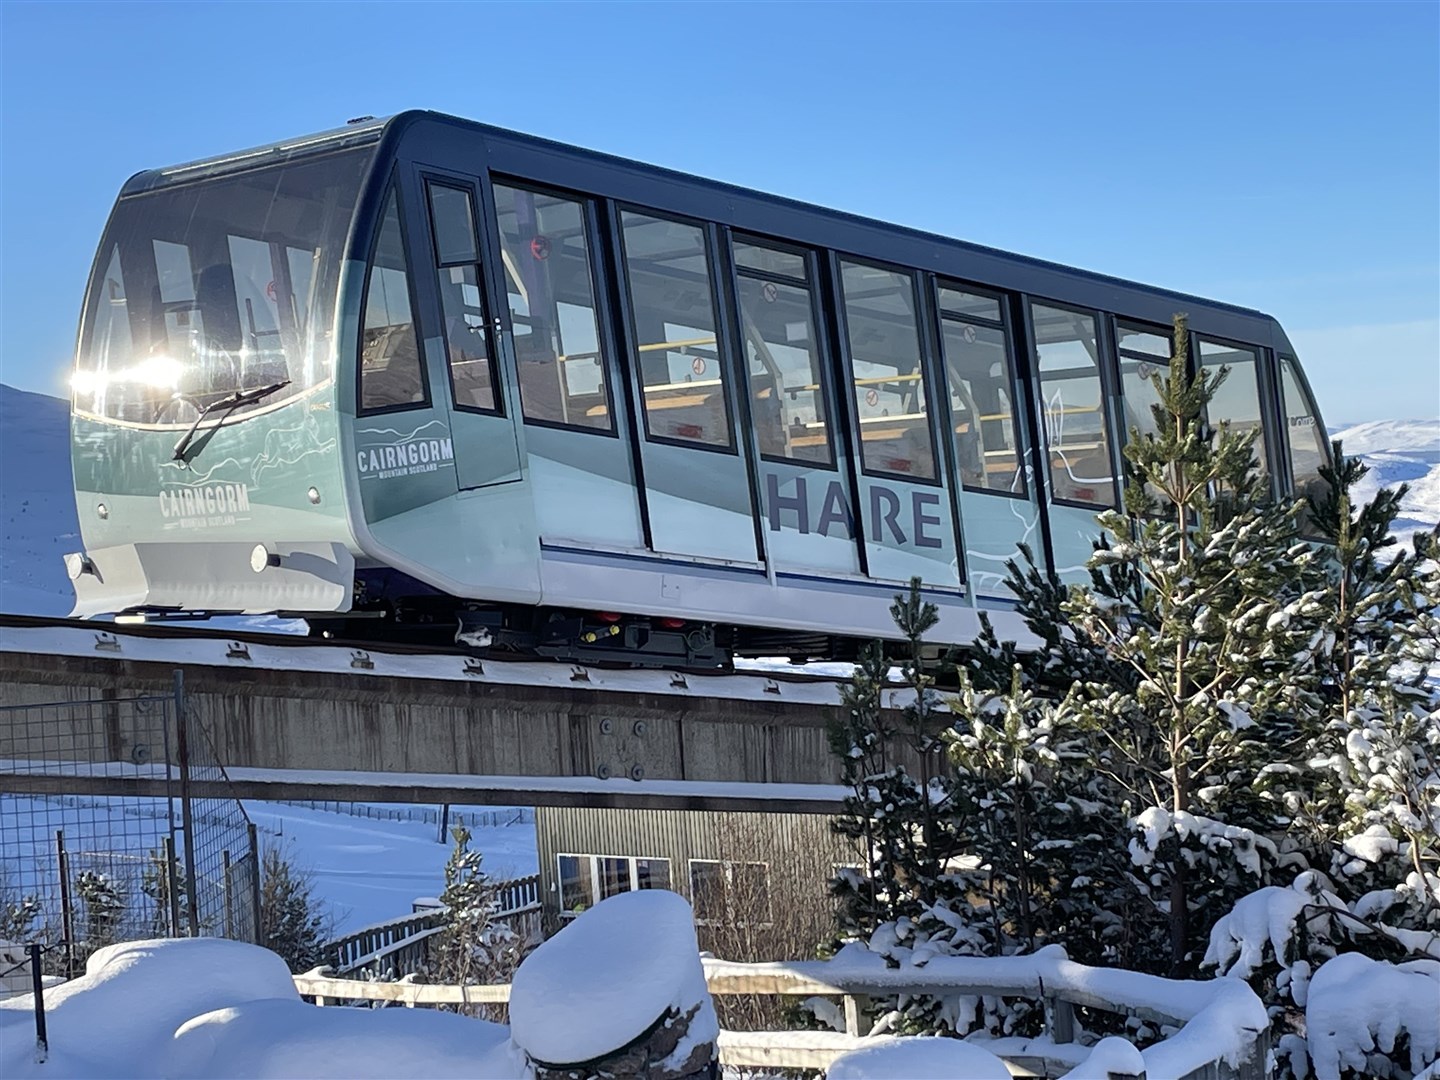 The Cairngorm funicular parked near the Base Station whilst undergoing trial runs at the start of the year.